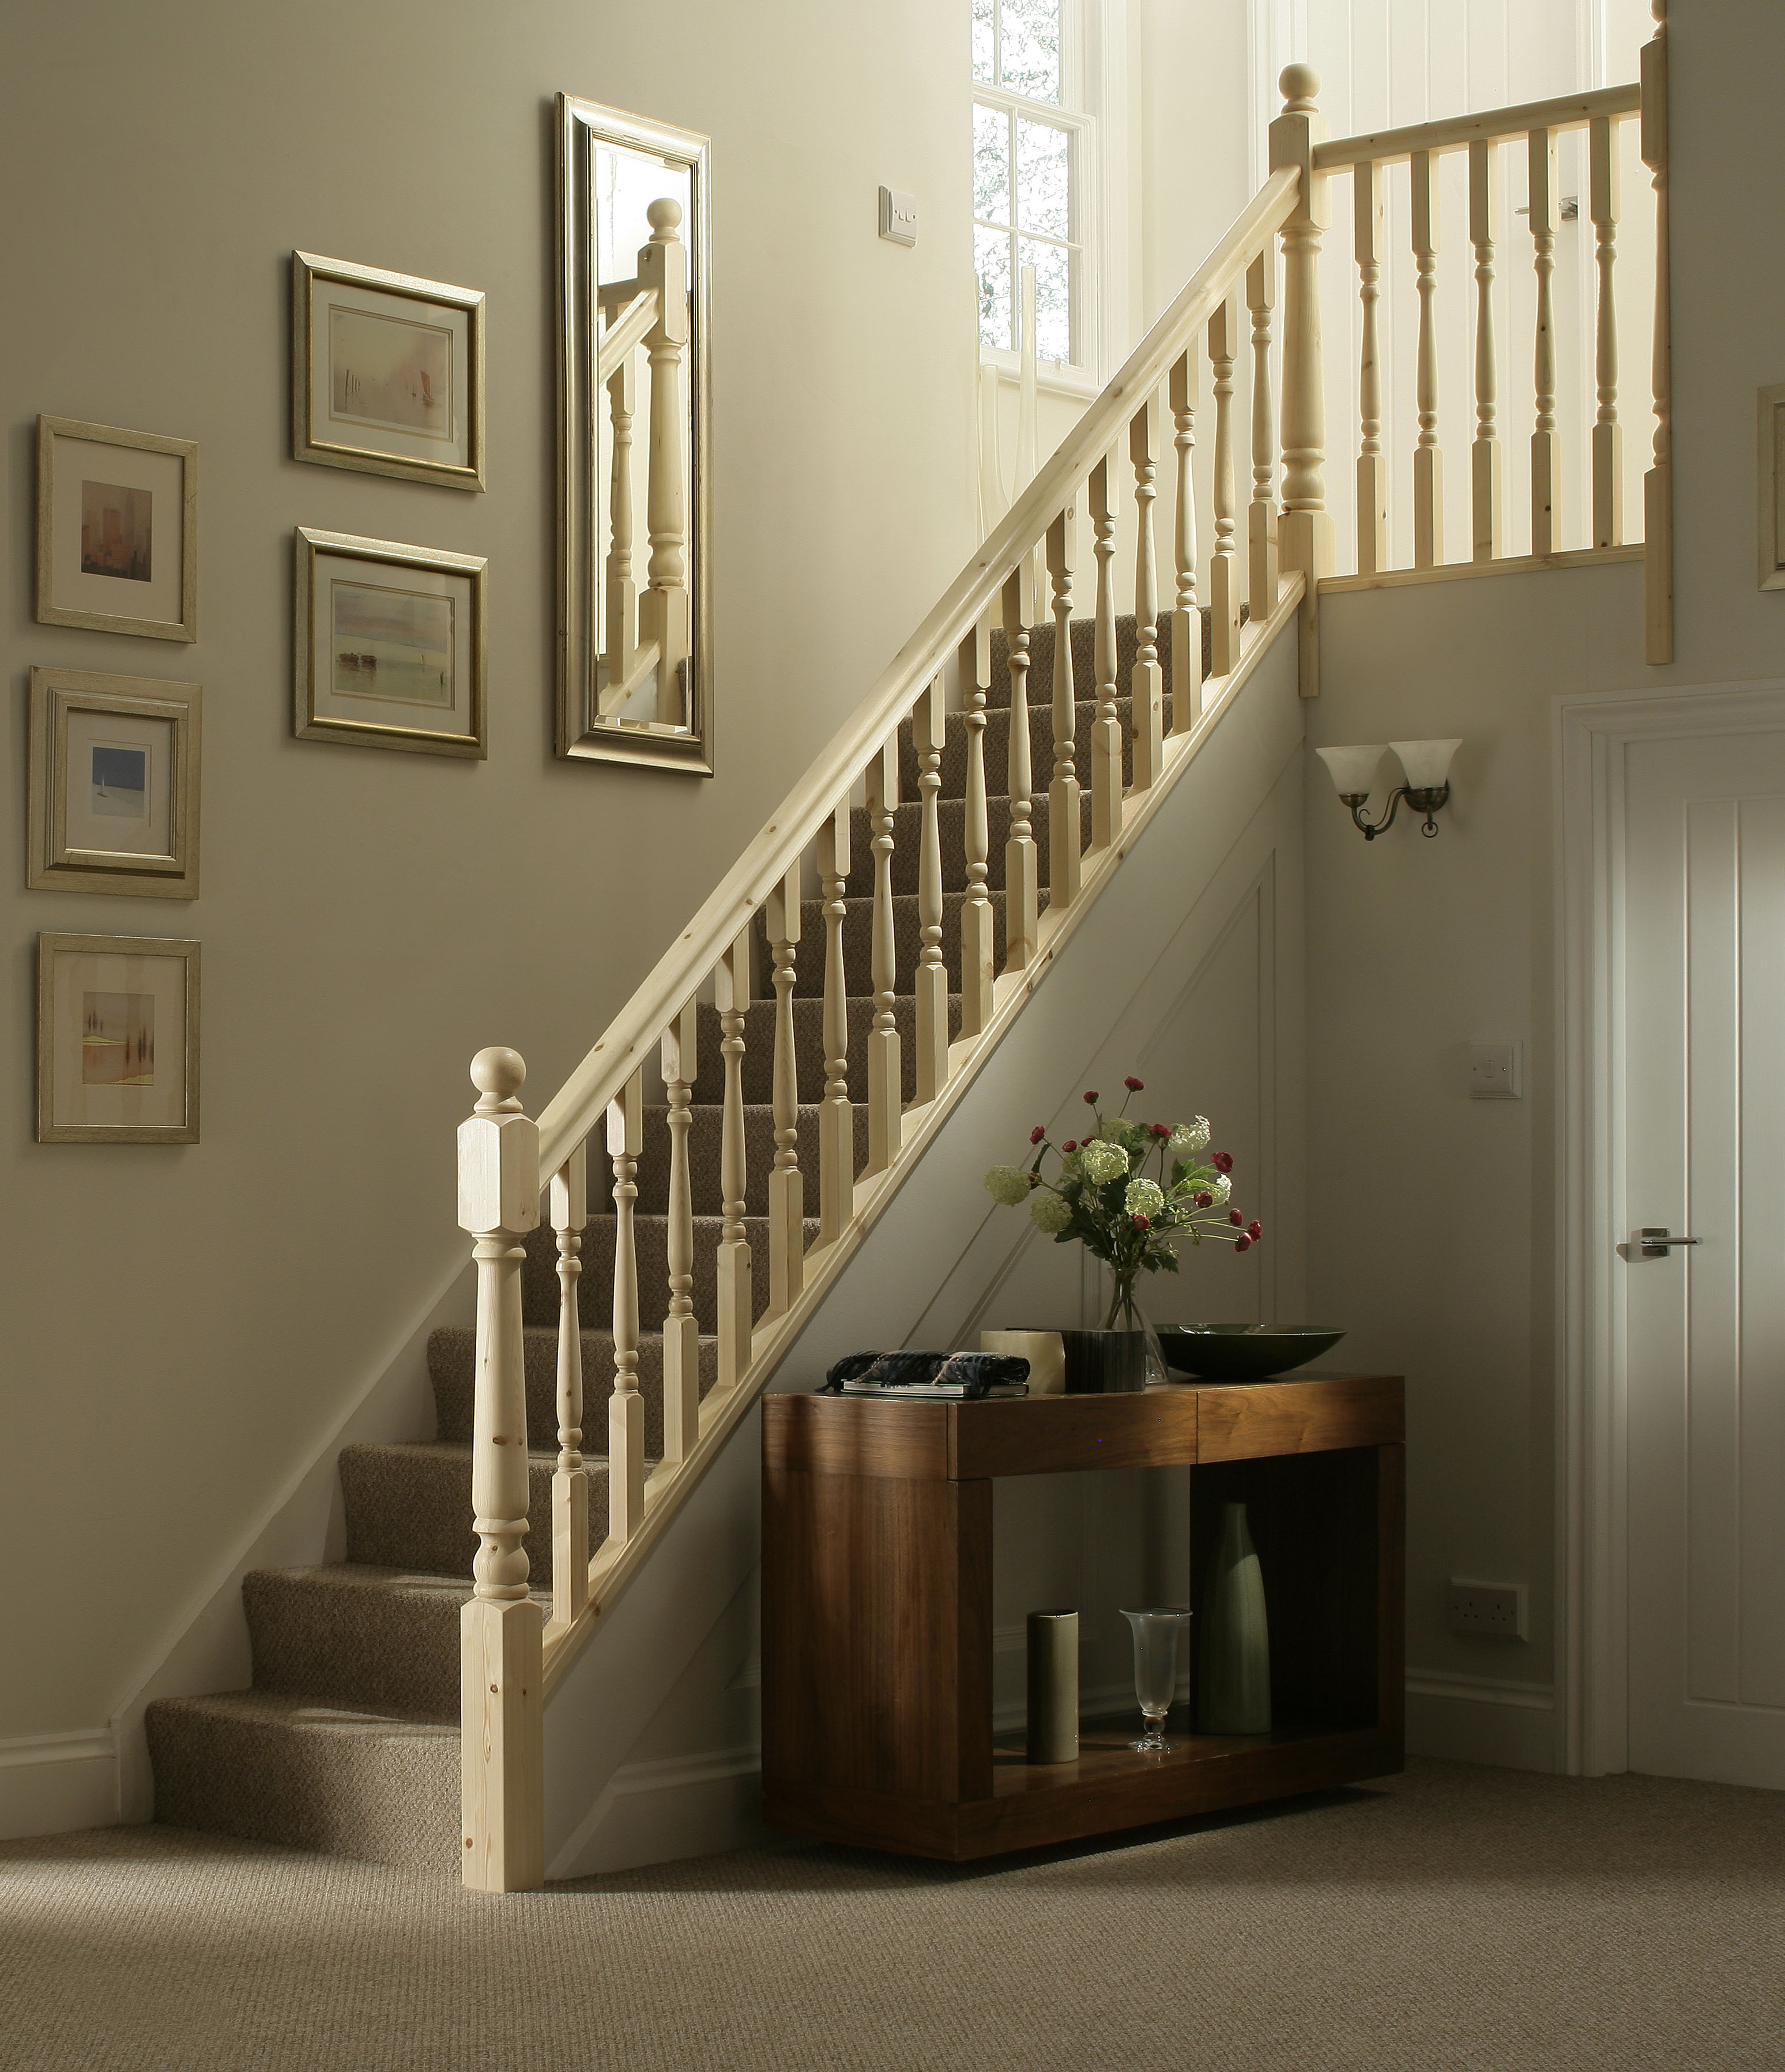 Home Timber Stair Parts 160216 121111 